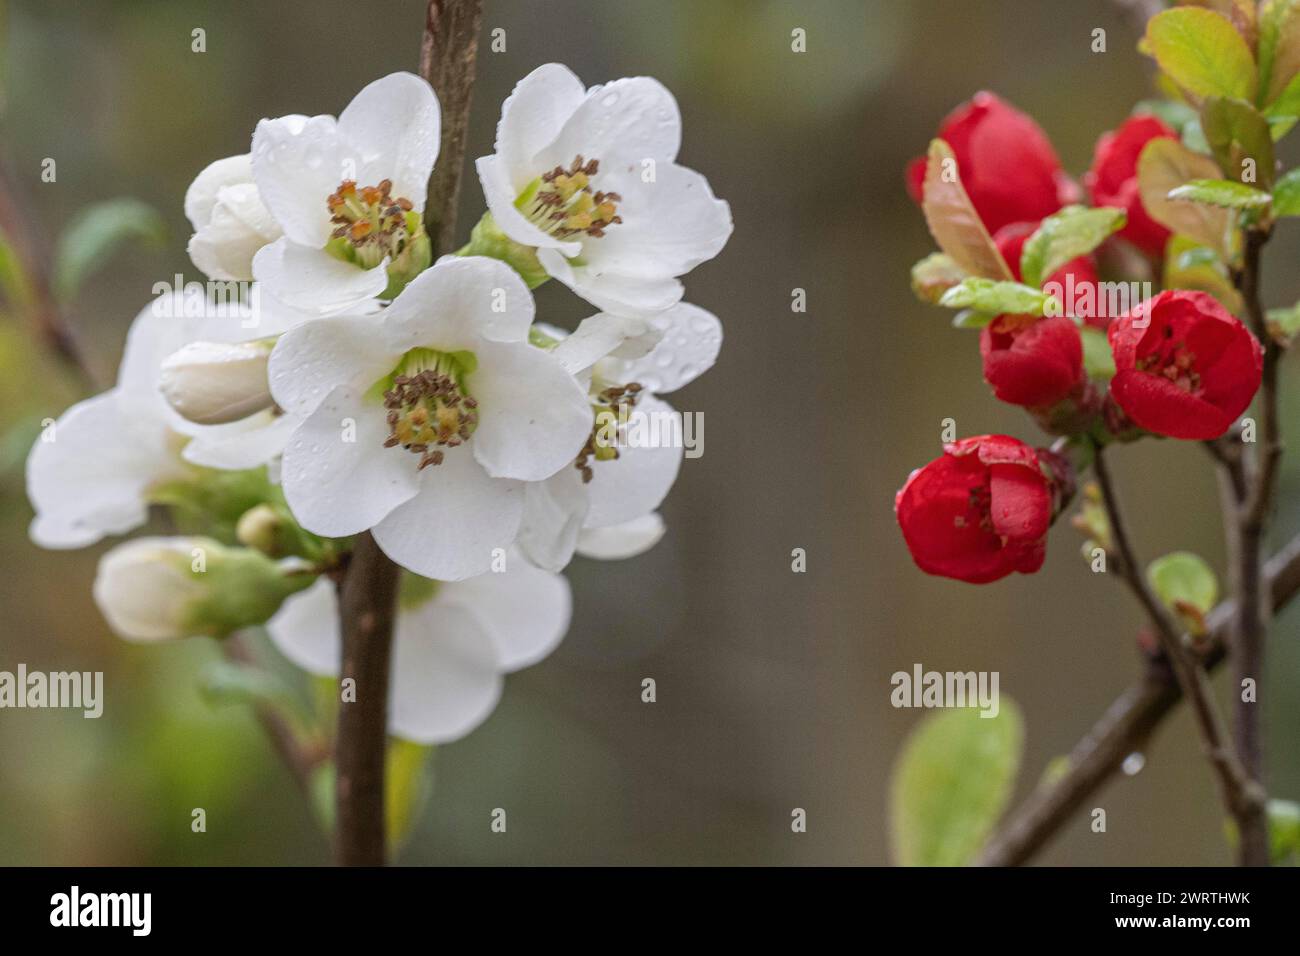 Japanese ornamental quince (Chaenomeles japonica), white form, Nordhorn Zoo, Lower Saxony, Germany Stock Photo